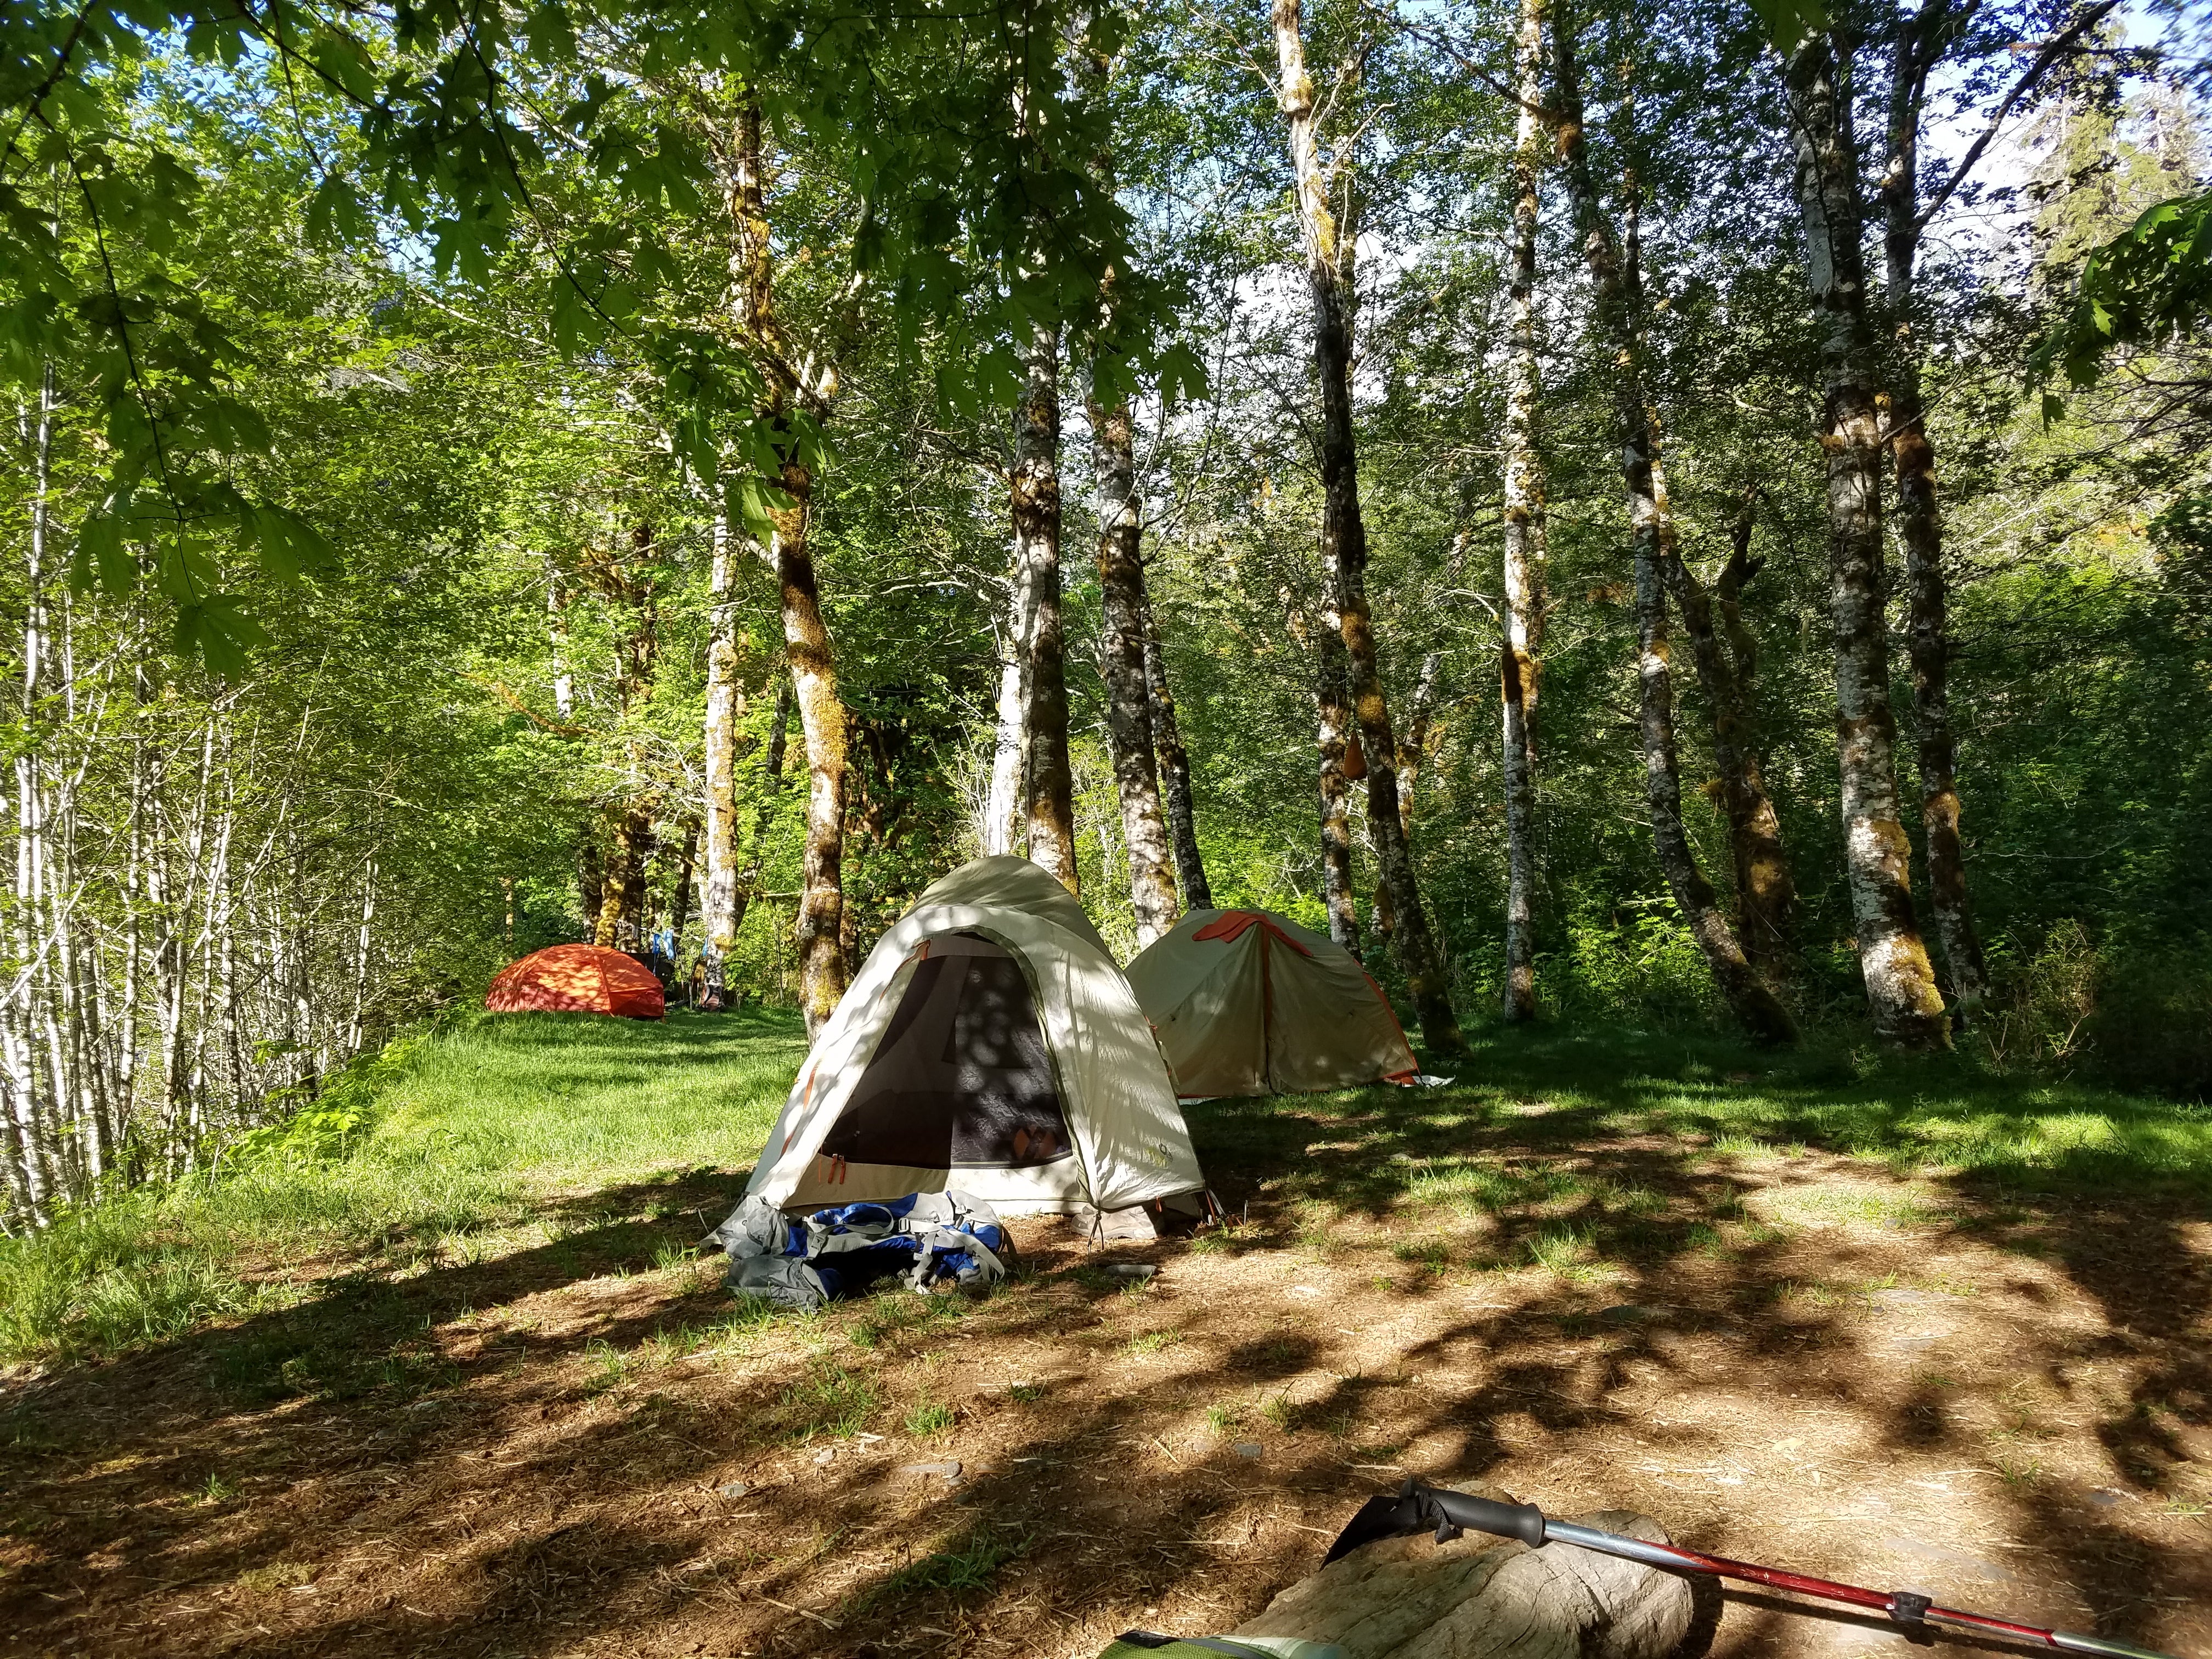 We camped at the end of the trail